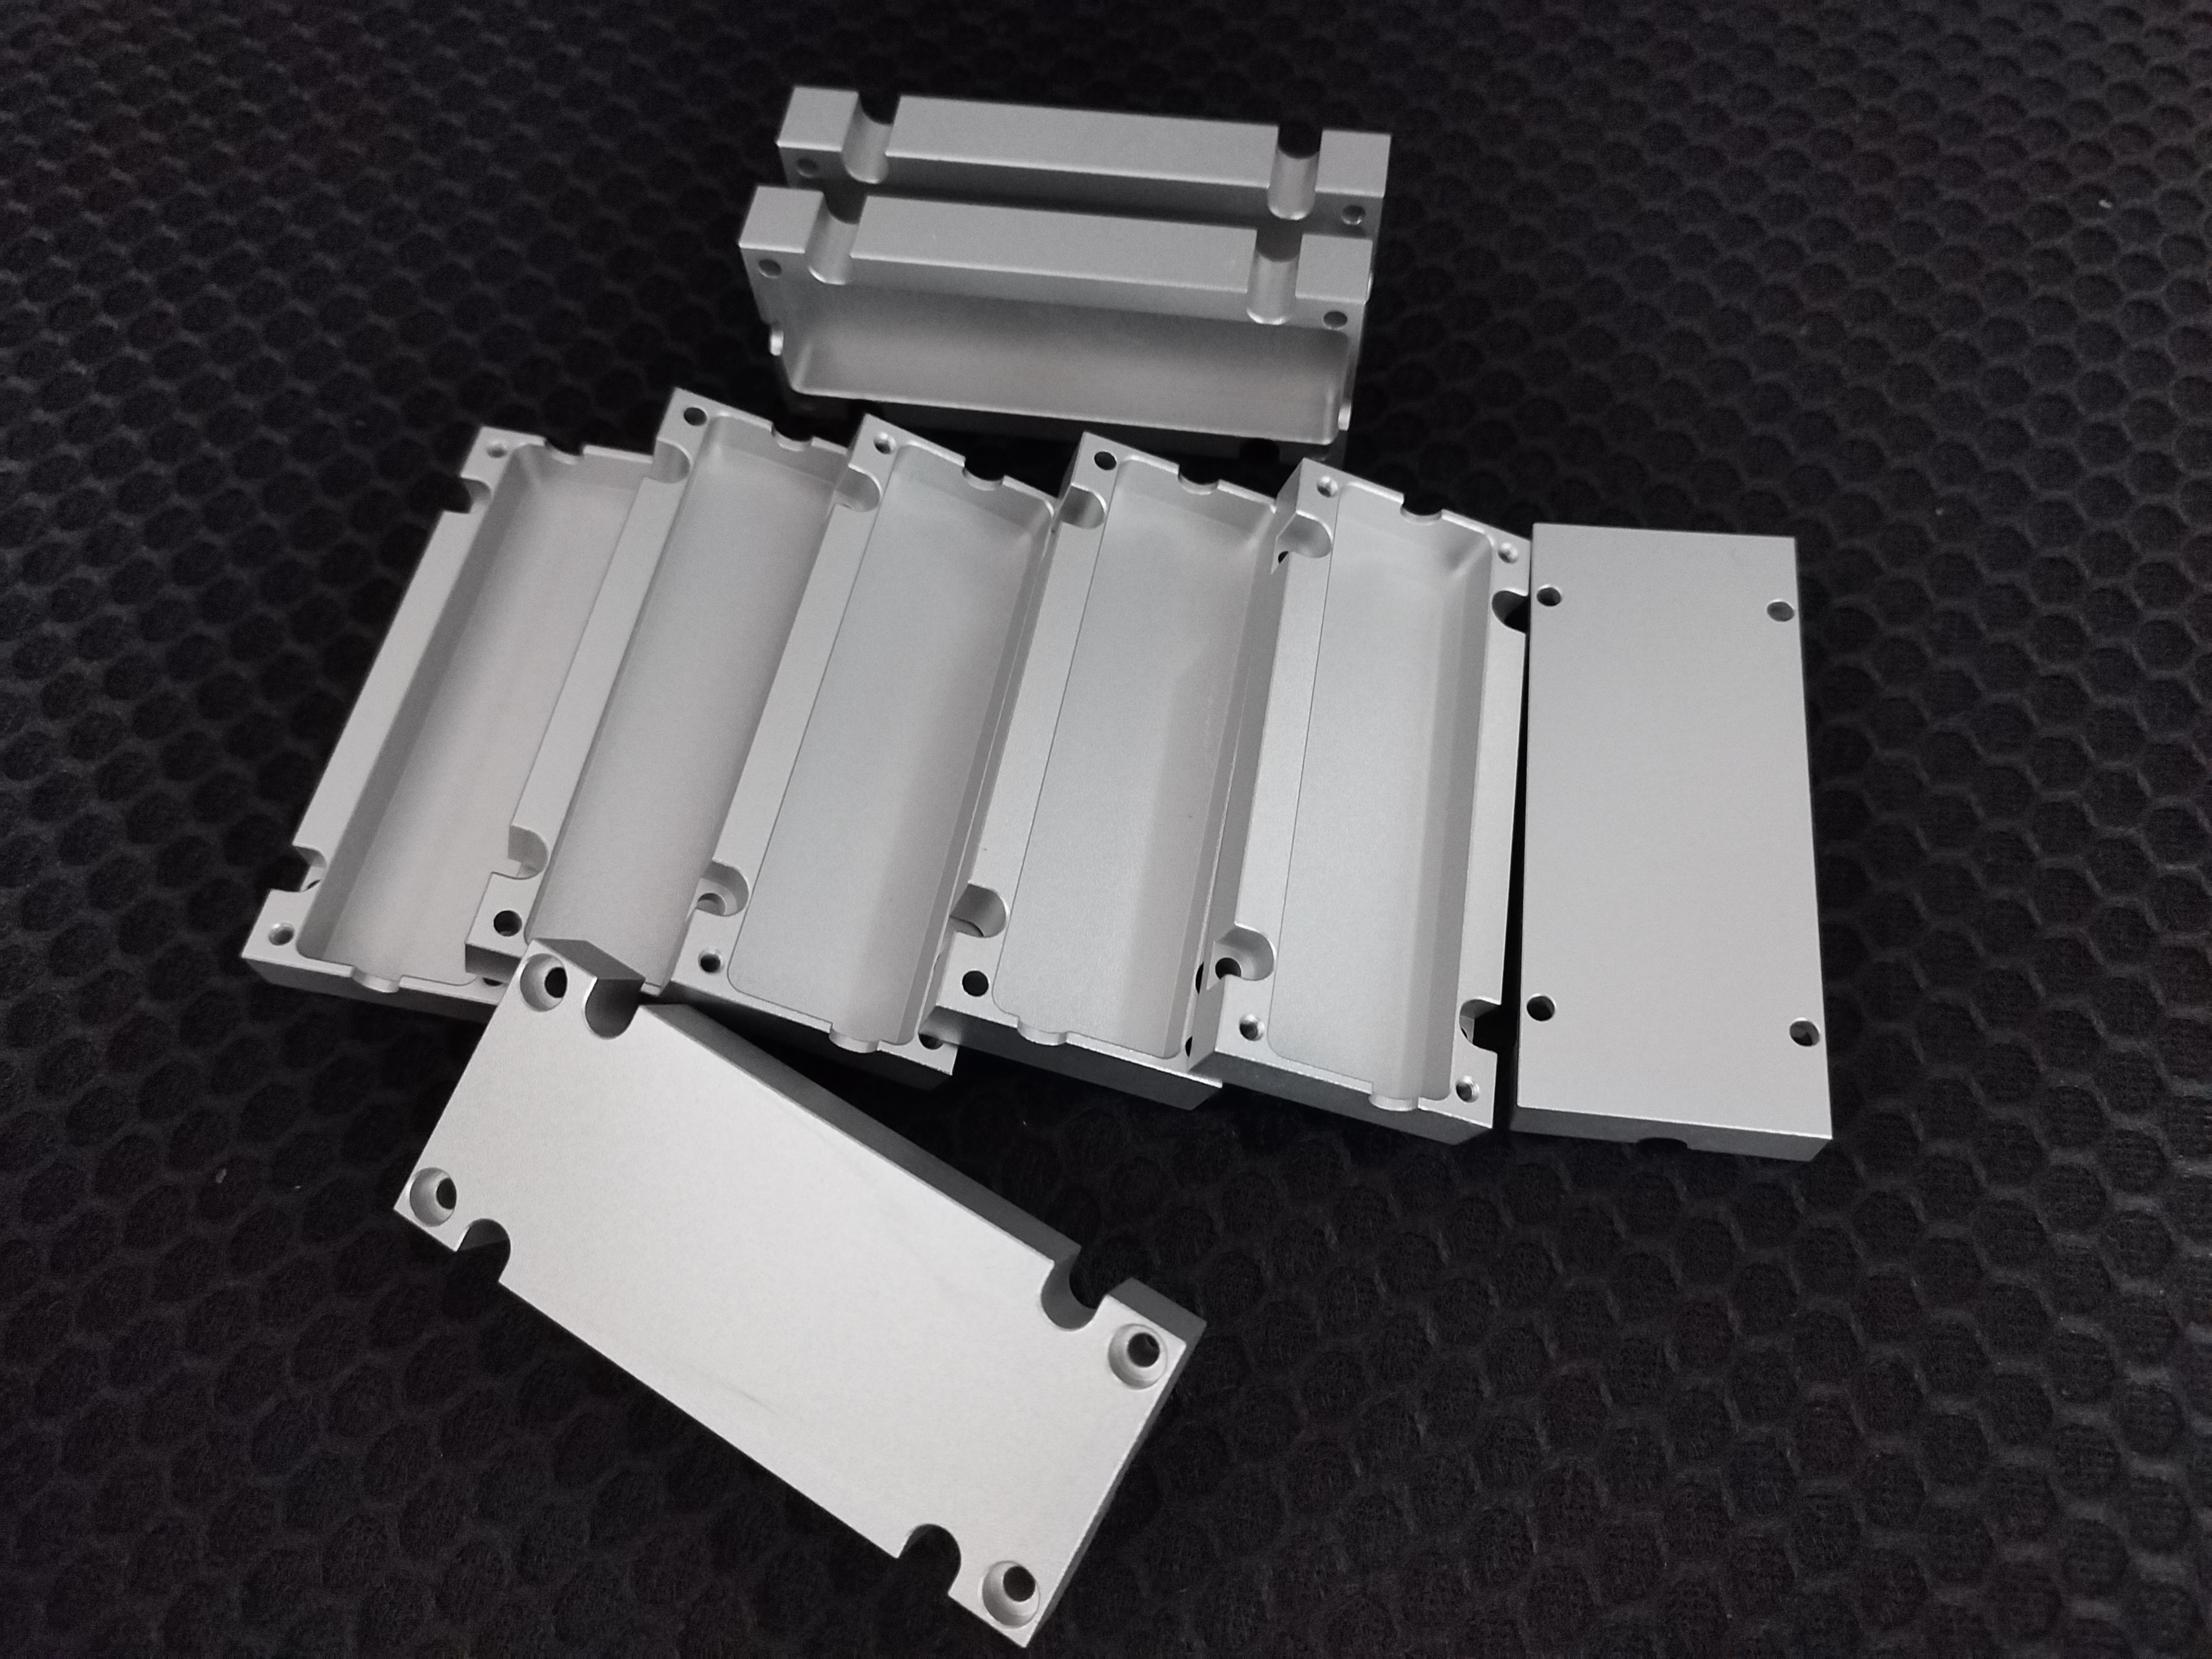 Bespoke precision milling parts made of aluminum 6061-T6